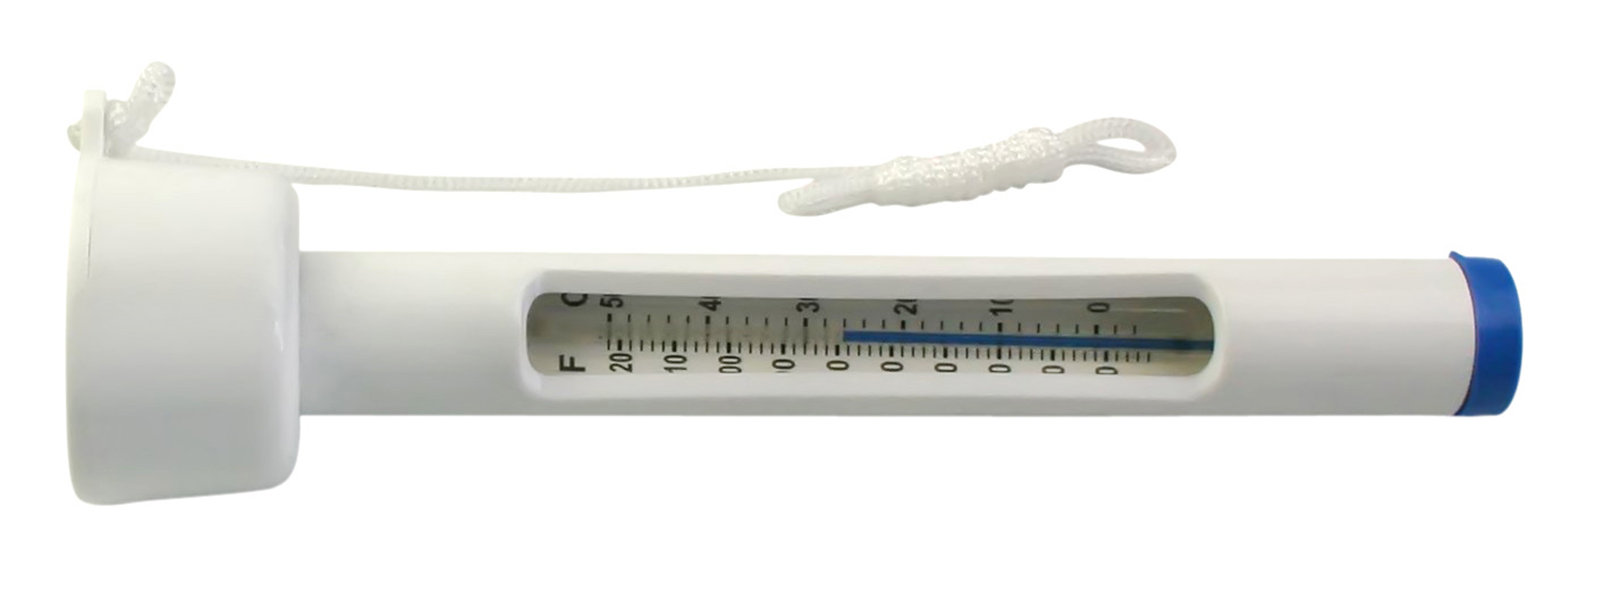 Thermometer Basic